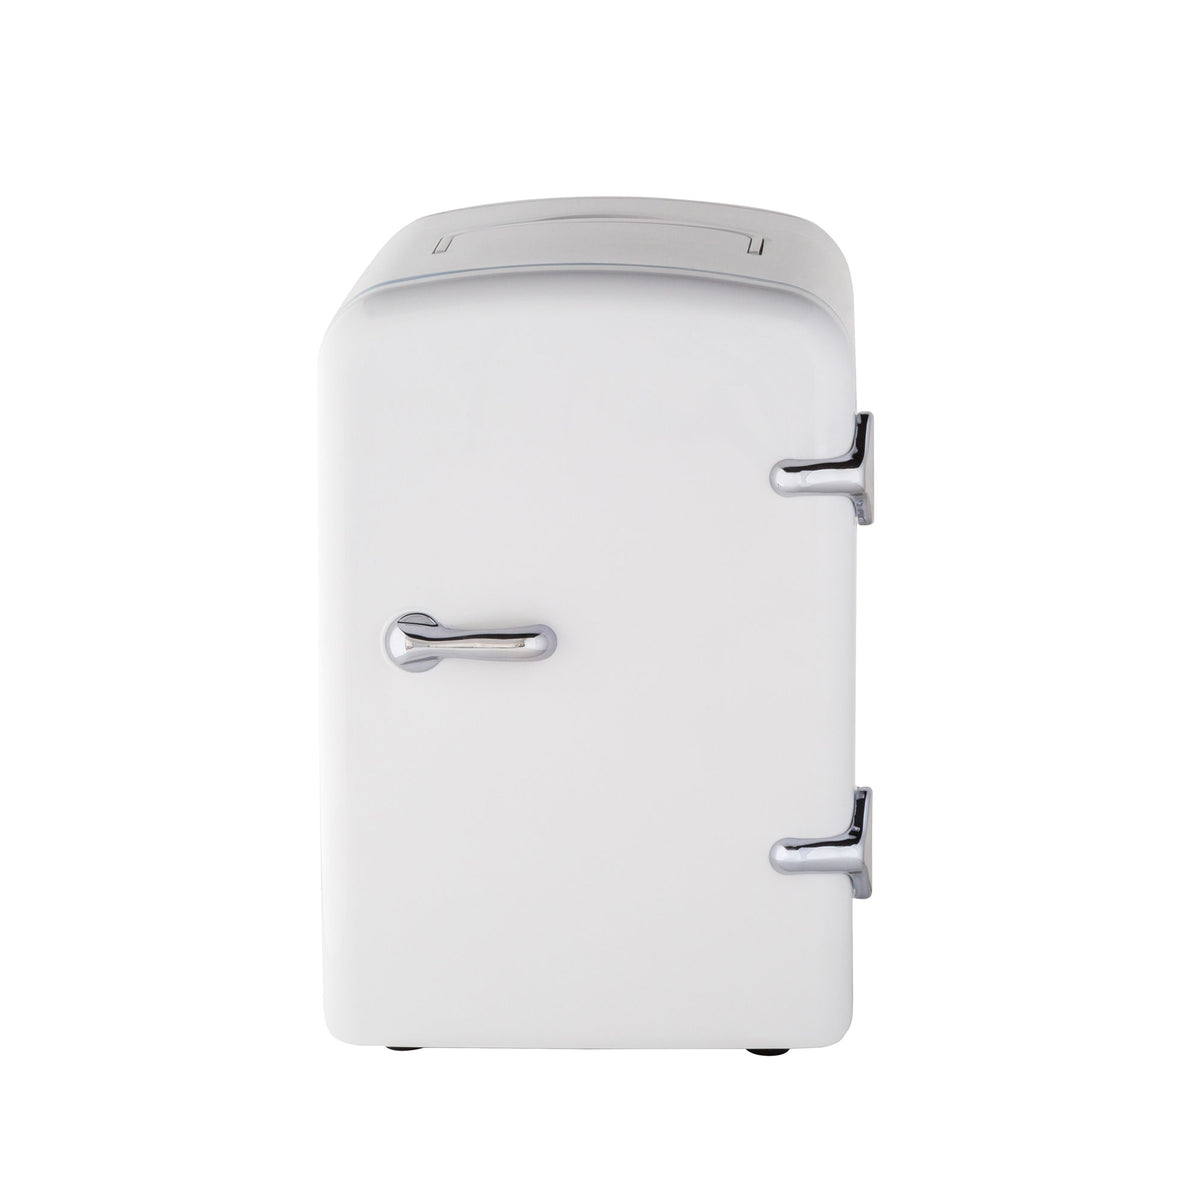 Front view of the BF550 Cosmetics, Beauty & Skincare Fridge in white colour with silver door handle and hinges.